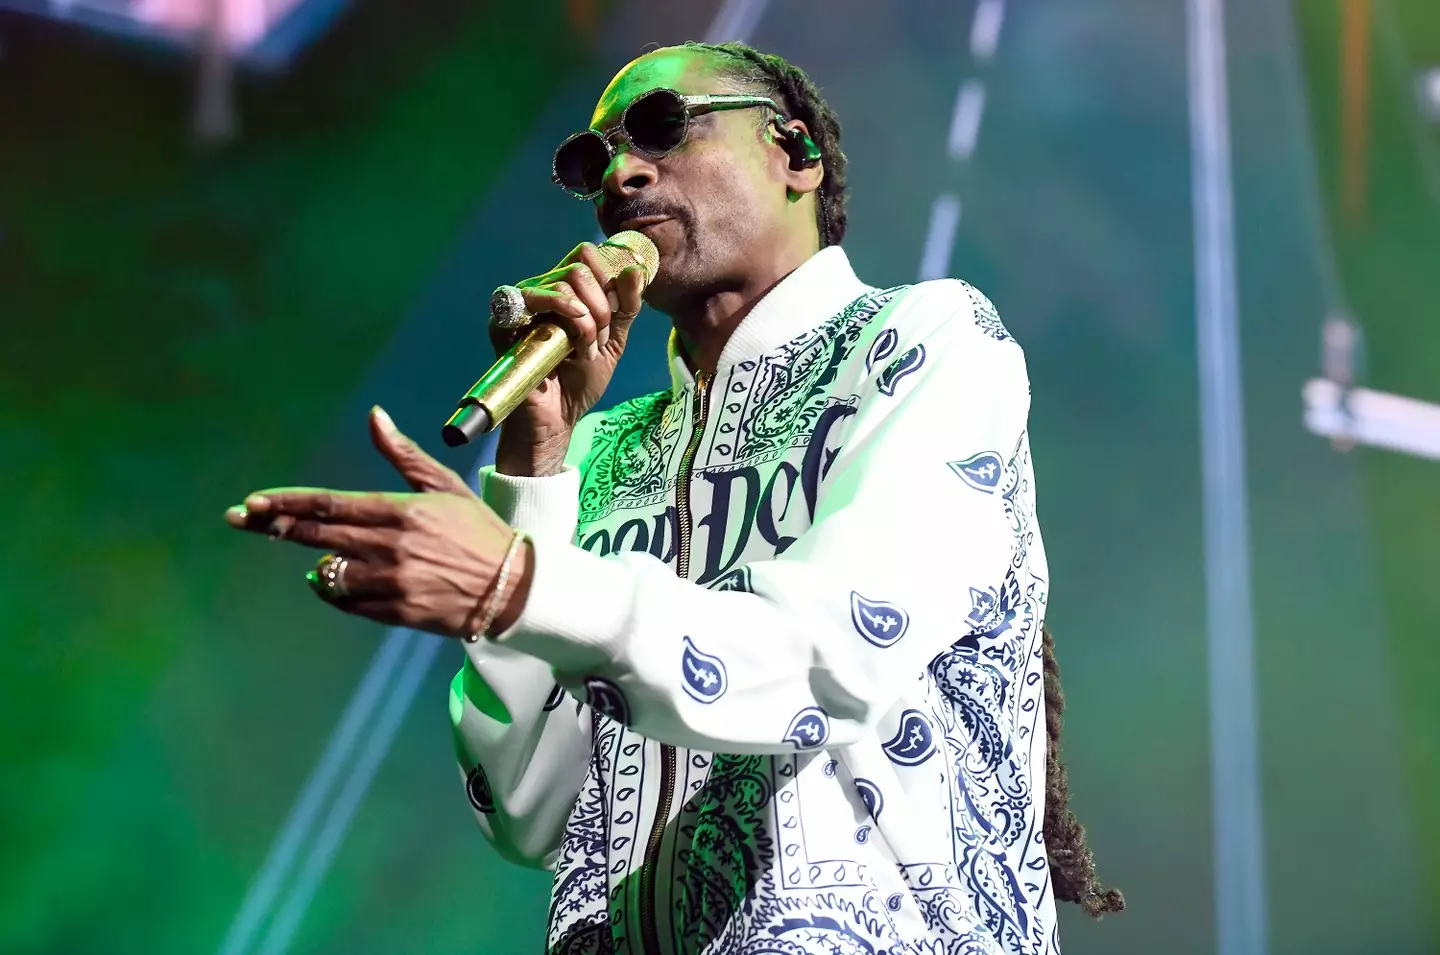 Snoop Dogg announced he has quit smoking week earlier on Thursday.